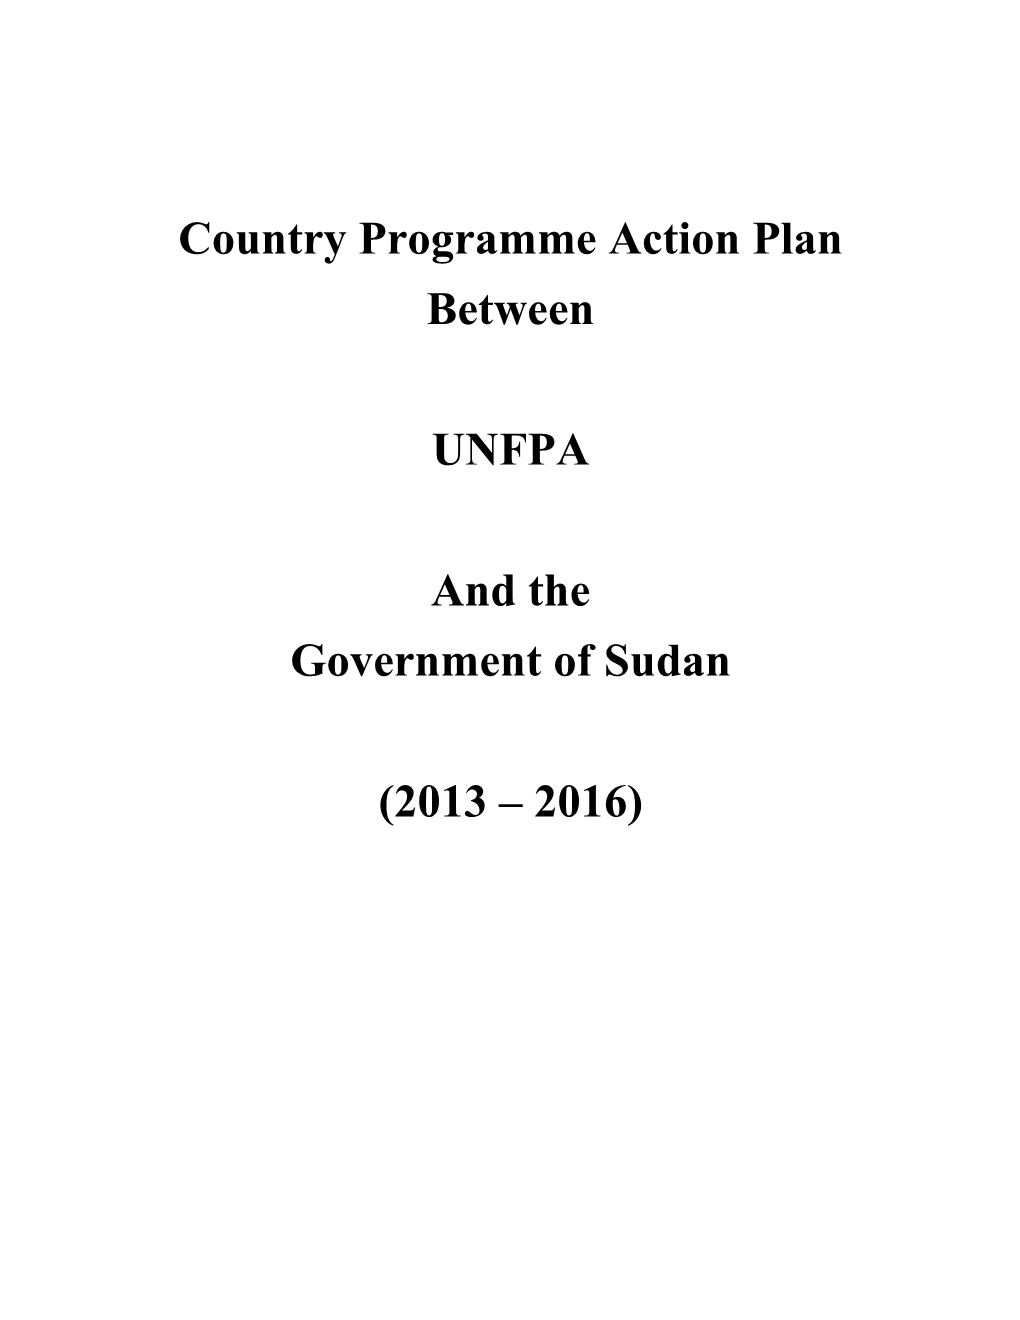 Country Programme Action Plan Between UNFPA and The